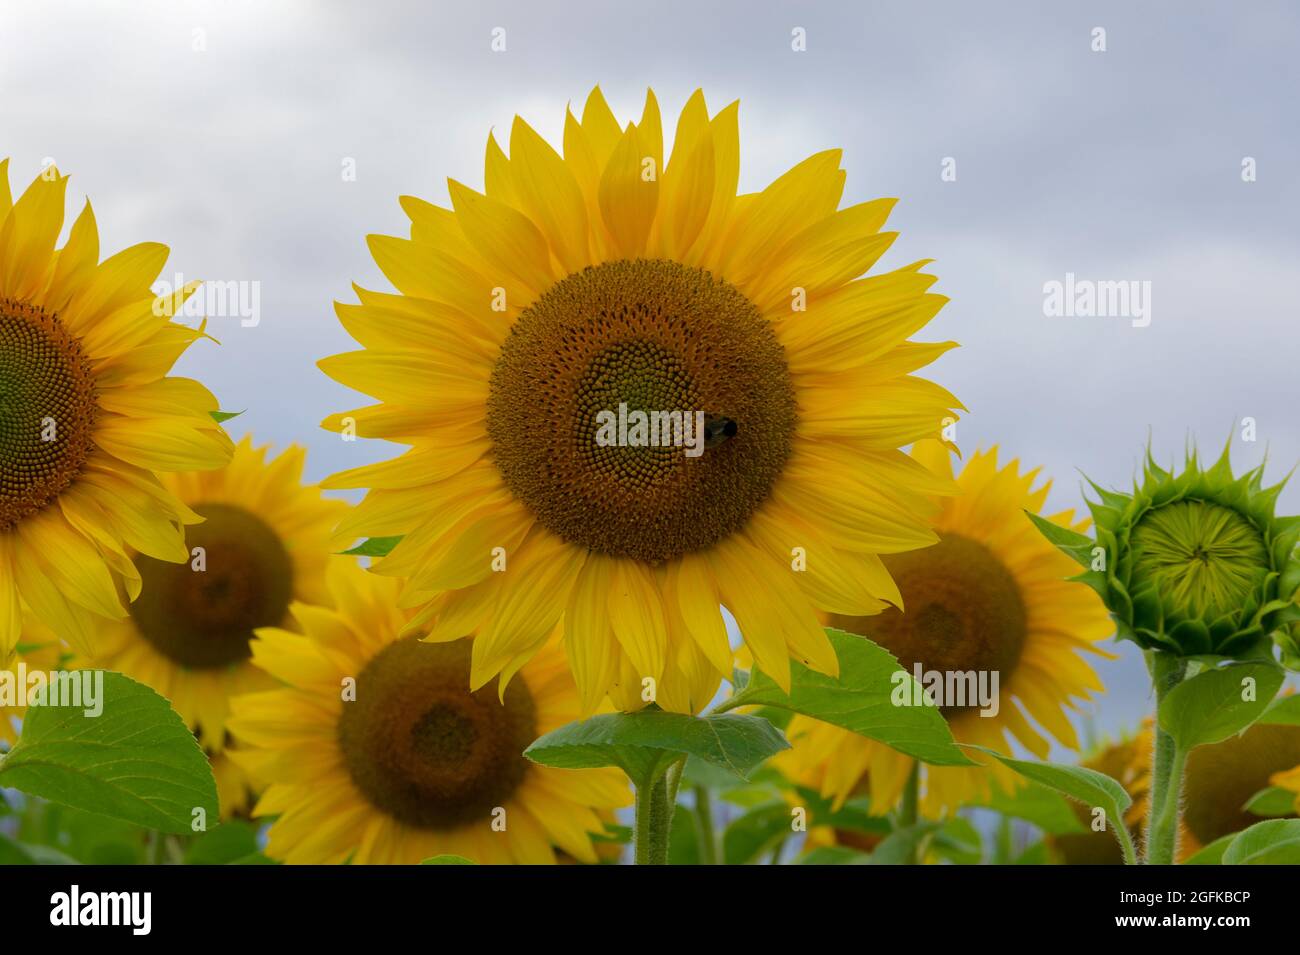 Portrait of a sunflower in full bloom Stock Photo